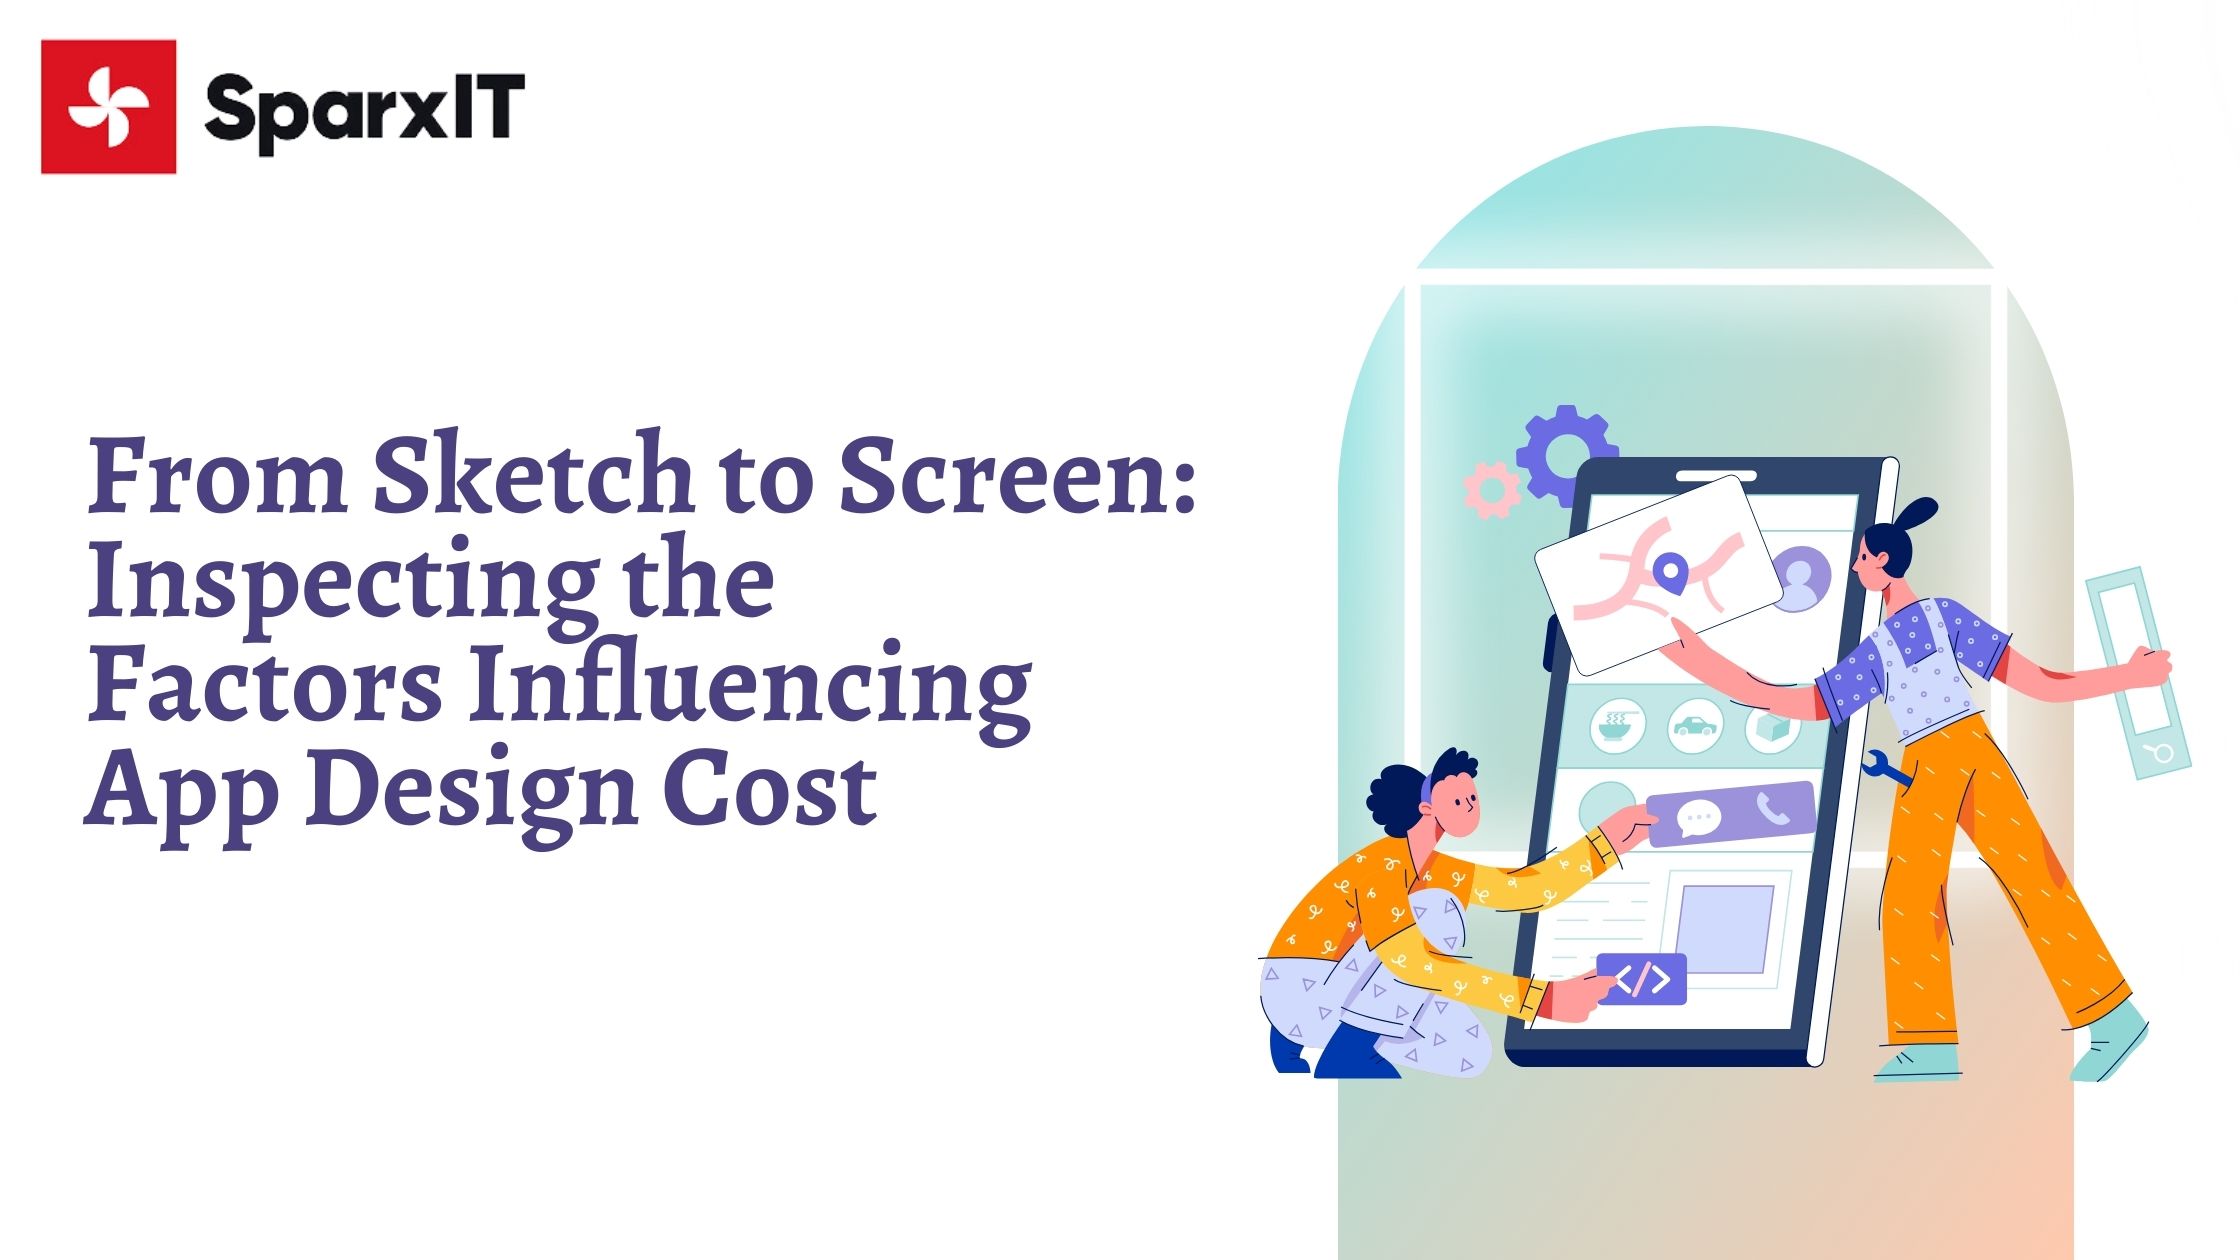 From Sketch to Screen: Inspecting the Factors Influencing App Design Cost